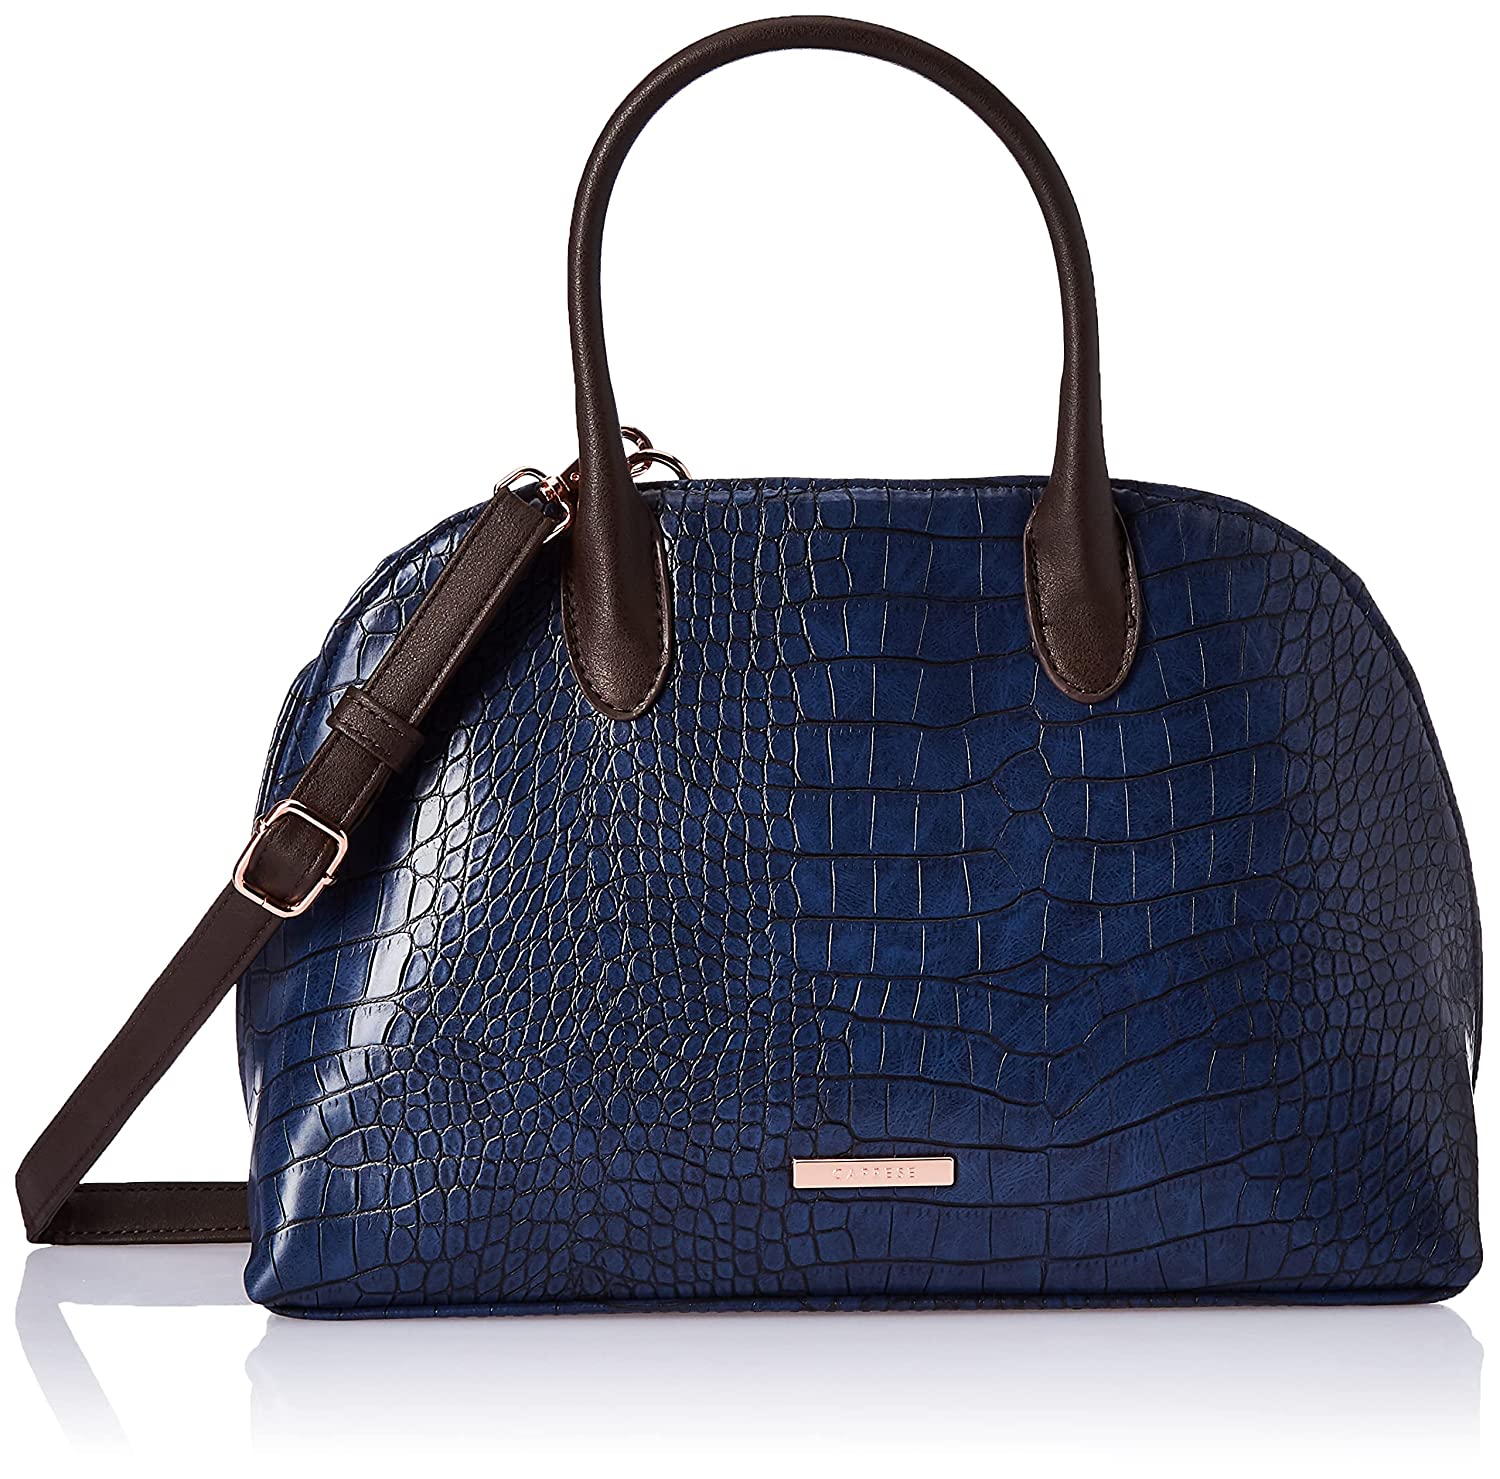 Top 8 Most Expensive Handbags of 2022 - DNP INDIA